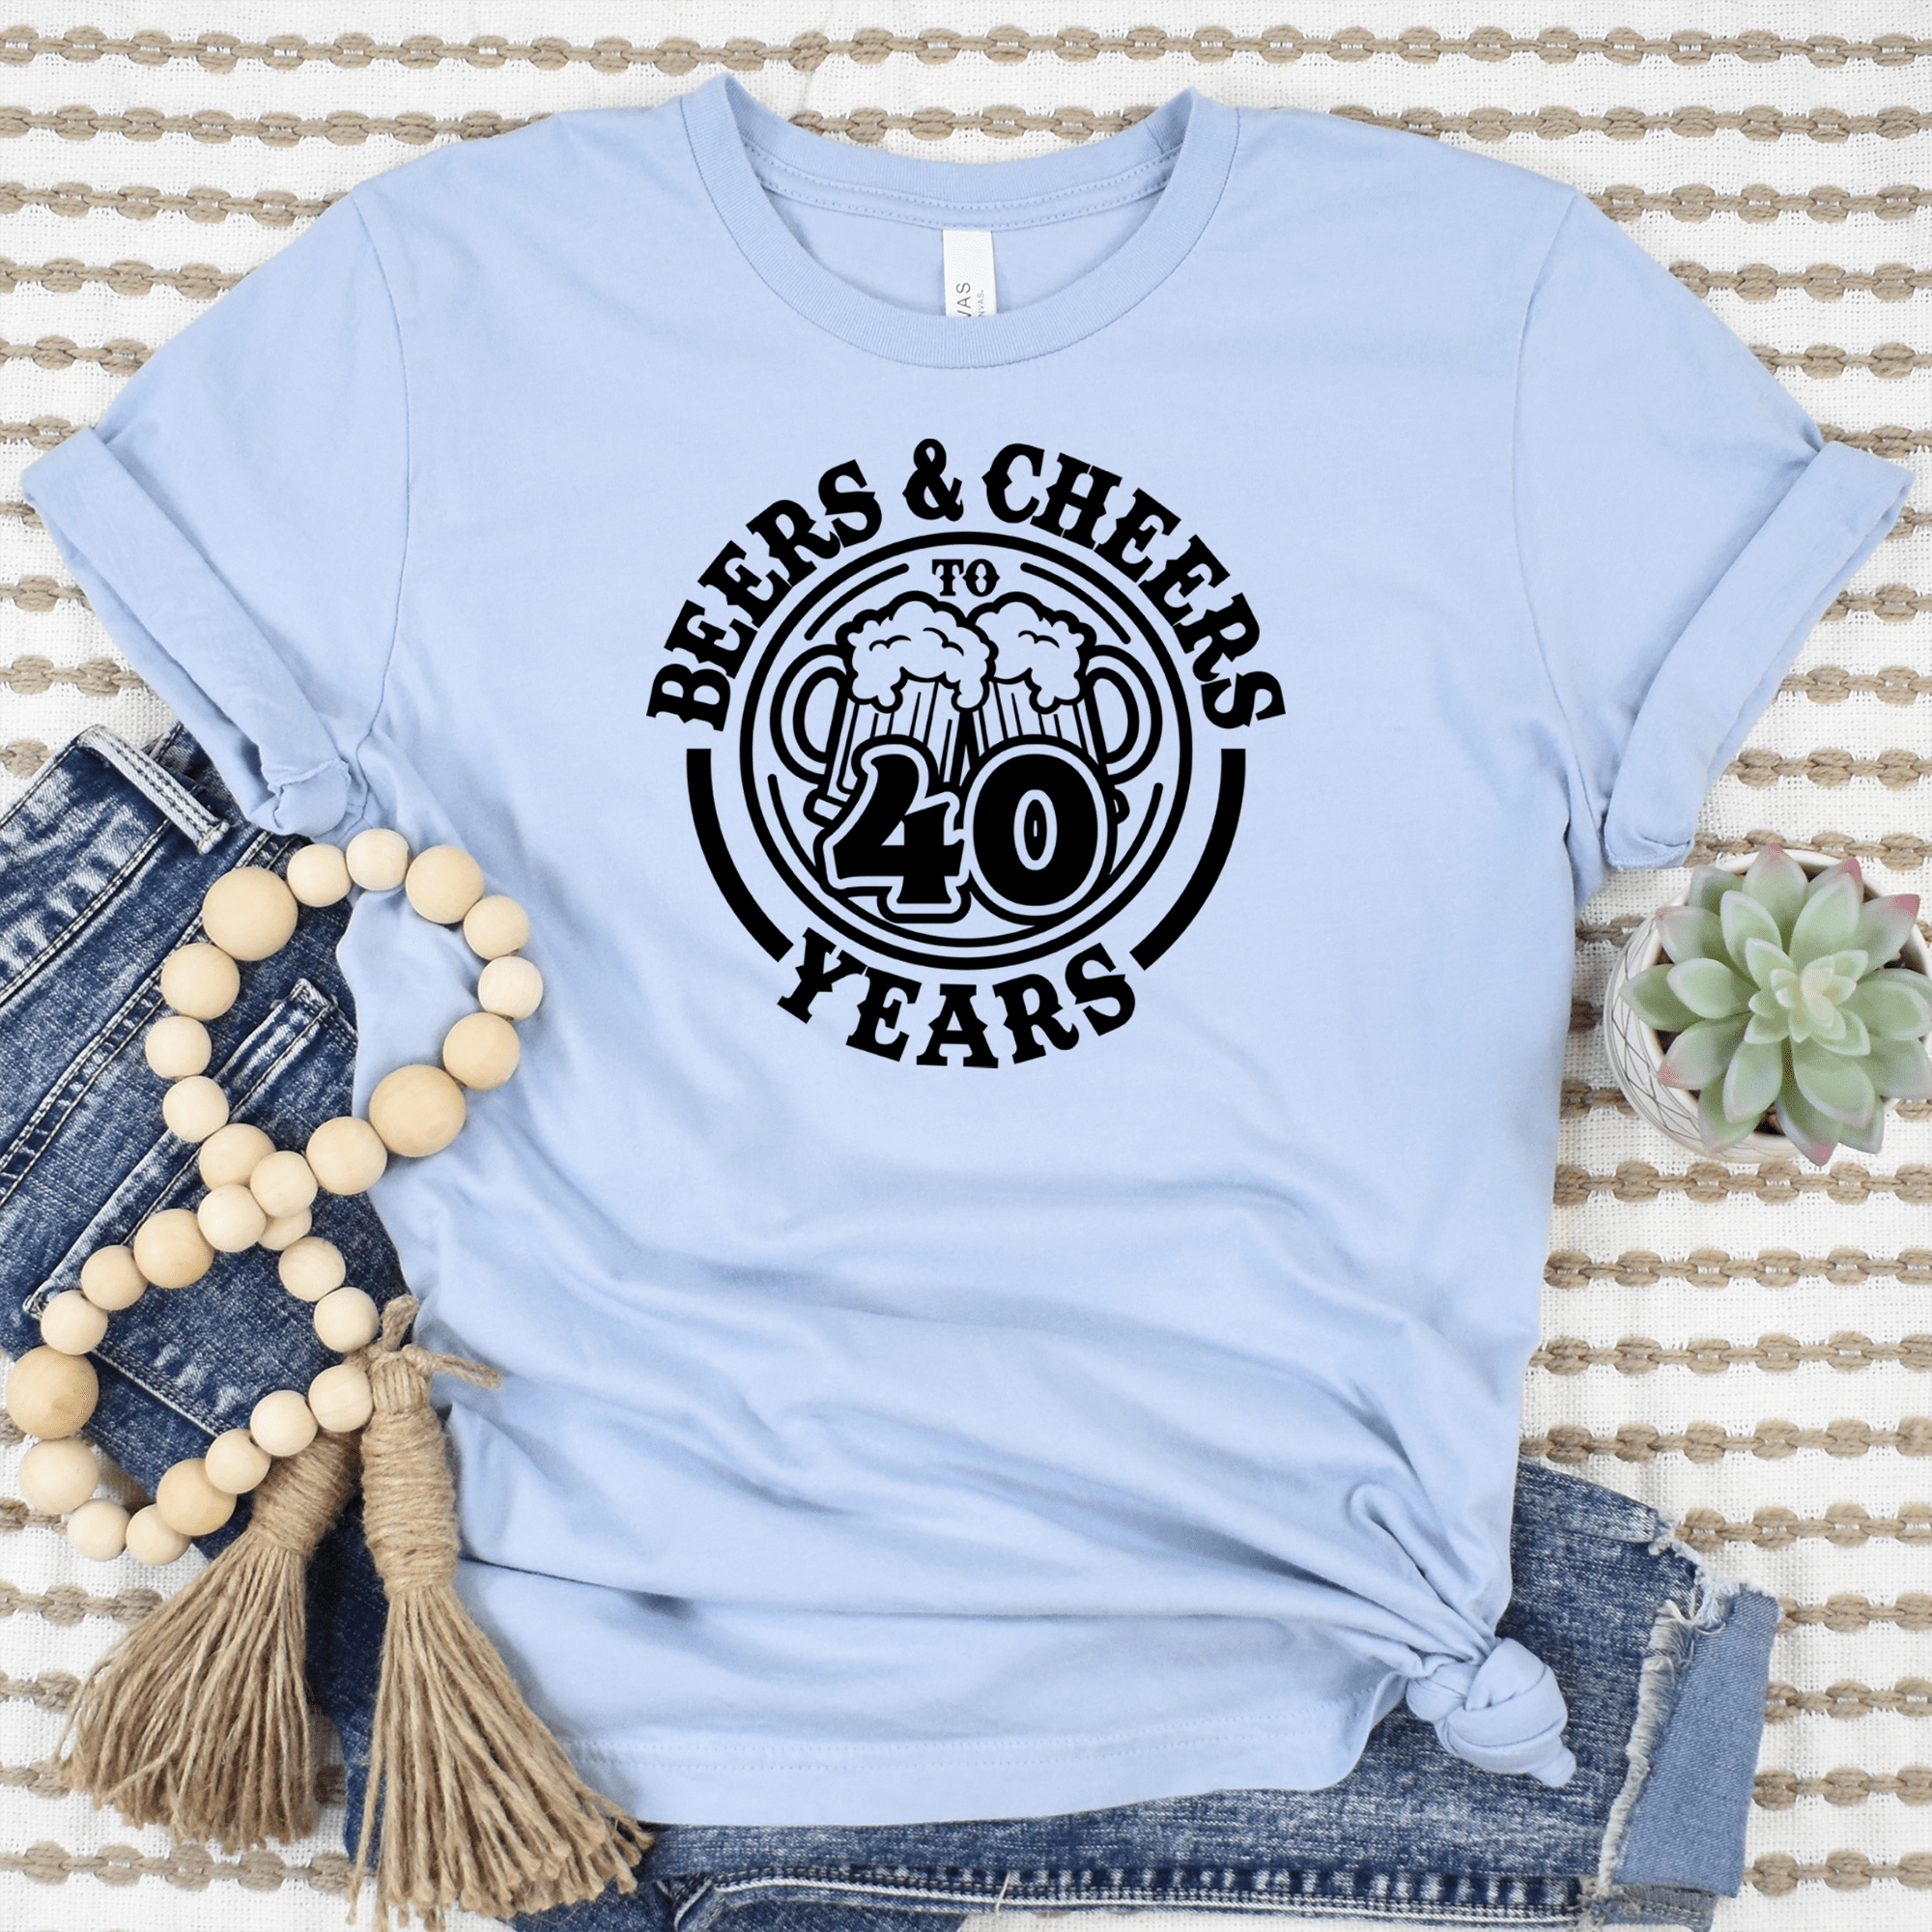 Womens Light Blue T Shirt with Cheers-And-Beers-40 design